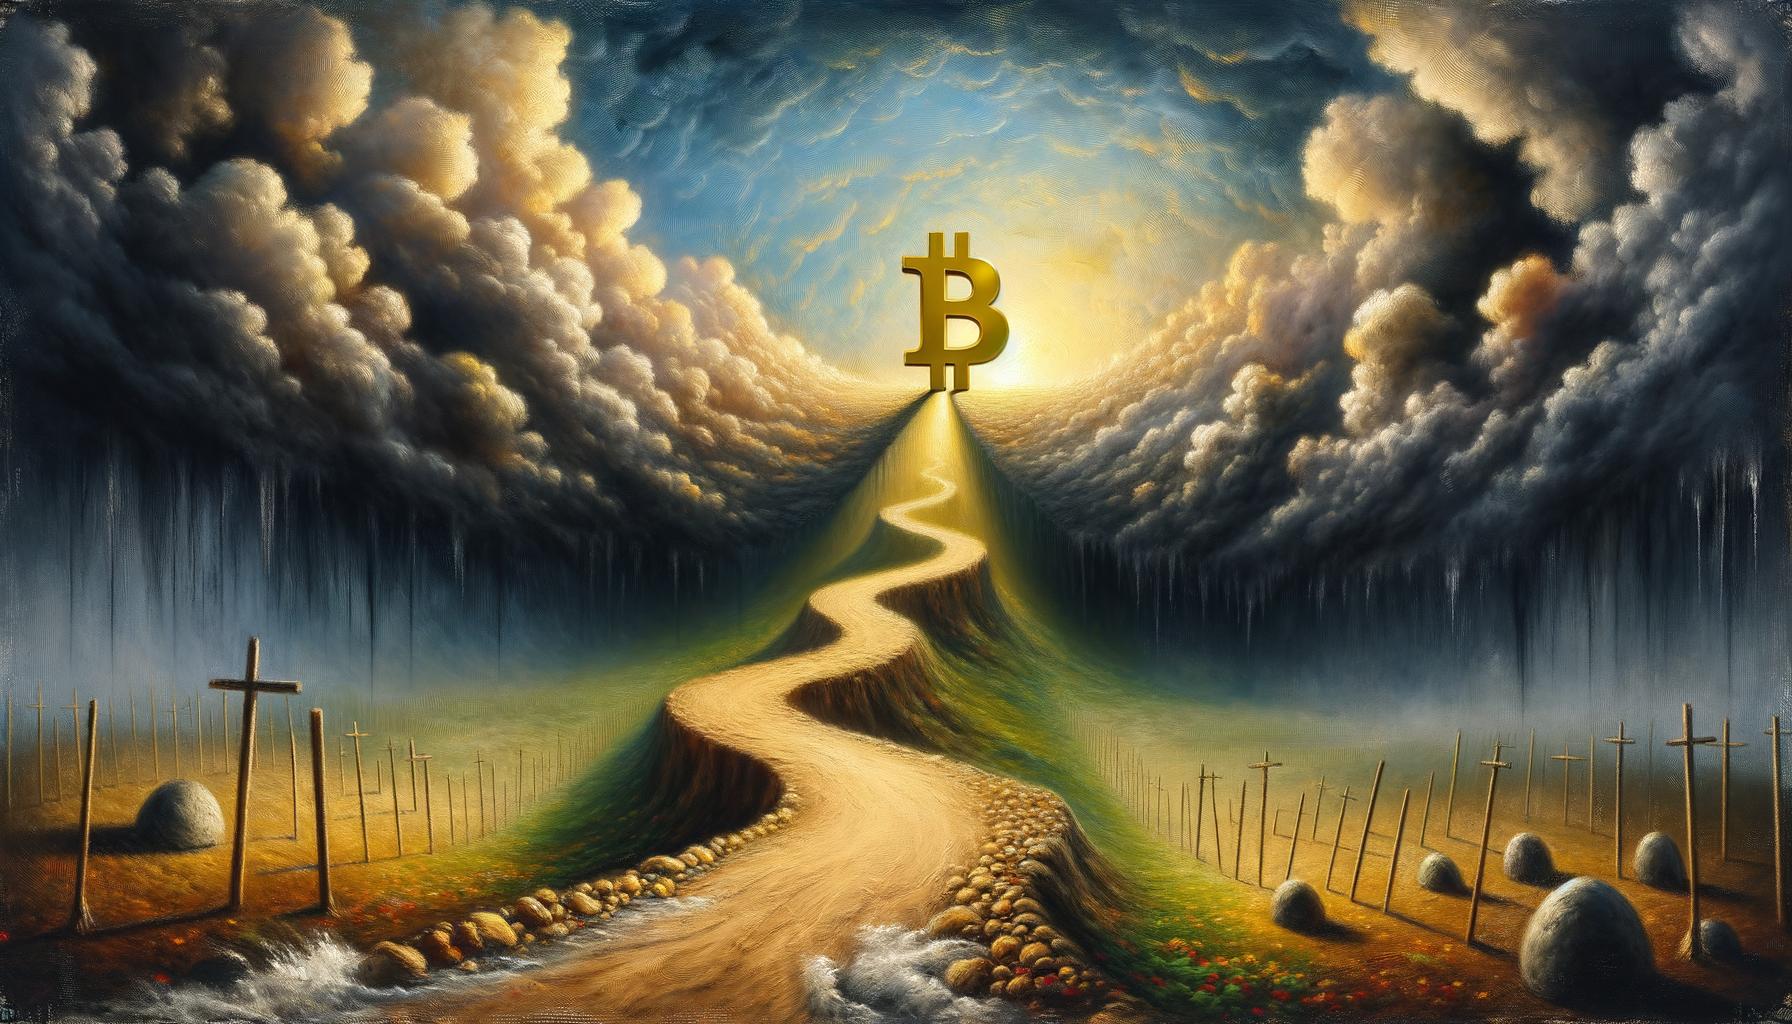 Bitcoin Price Slips Lower: Slow Descent or Opportunity Ahead?